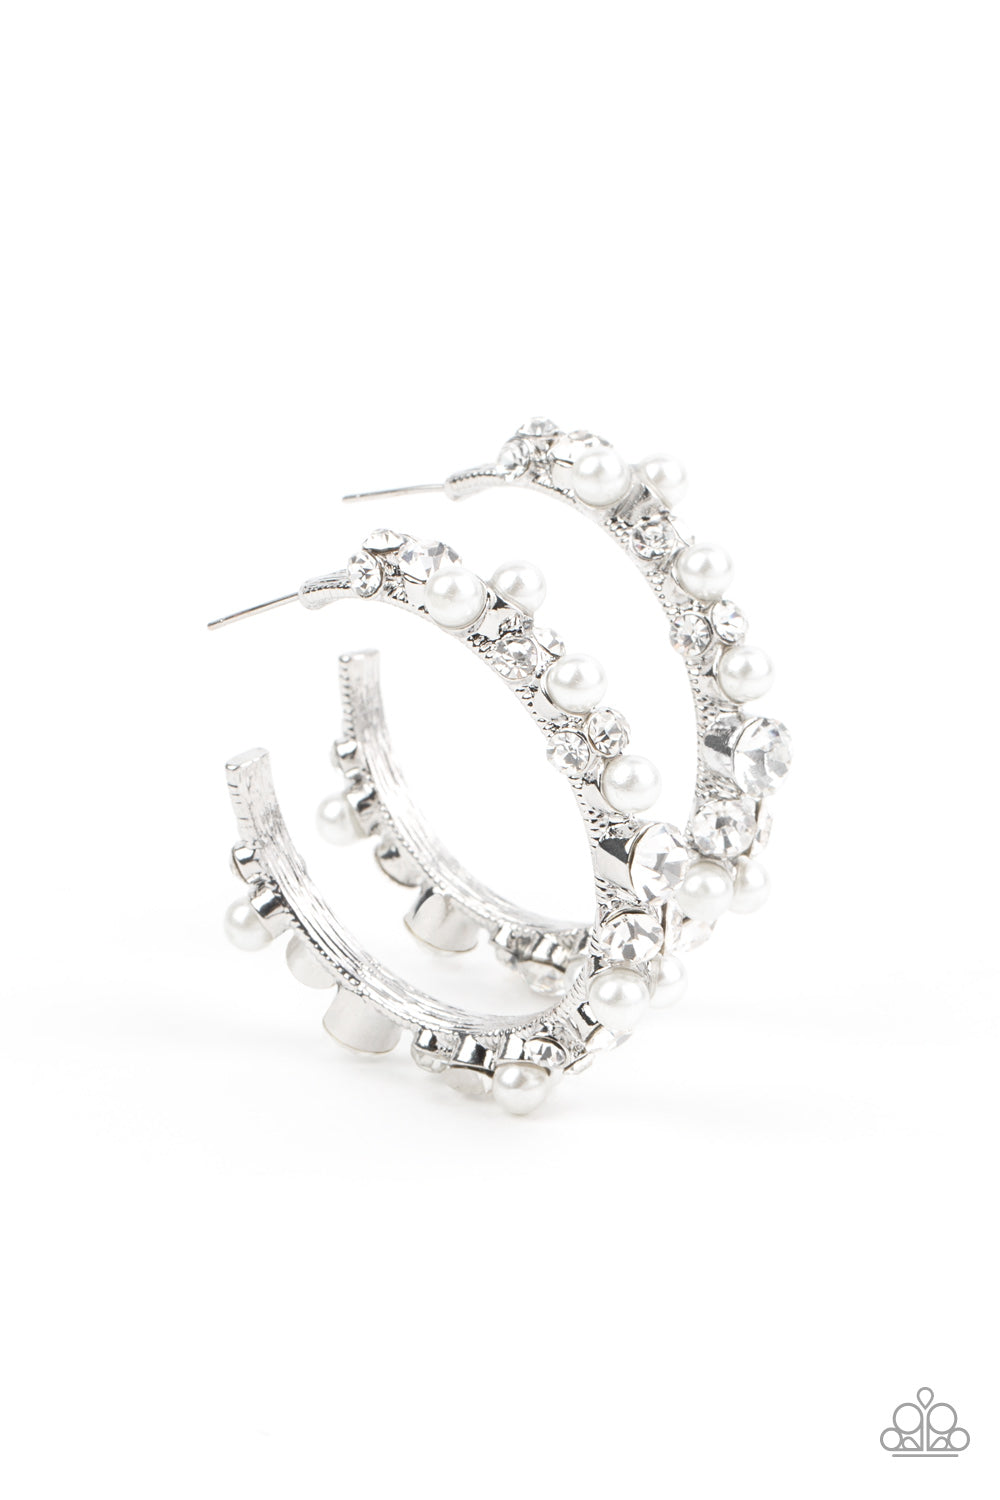 Life of the Party - A bubbly array of classic white rhinestones and glassy white rhinestones are encrusted along the front of a silver hoop, creating an elegantly effervescent look. Earring attaches to a standard post fitting. Hoop measures approximately 1 1/2" in diameter. All Paparazzi accessories are nickel free and lead free.